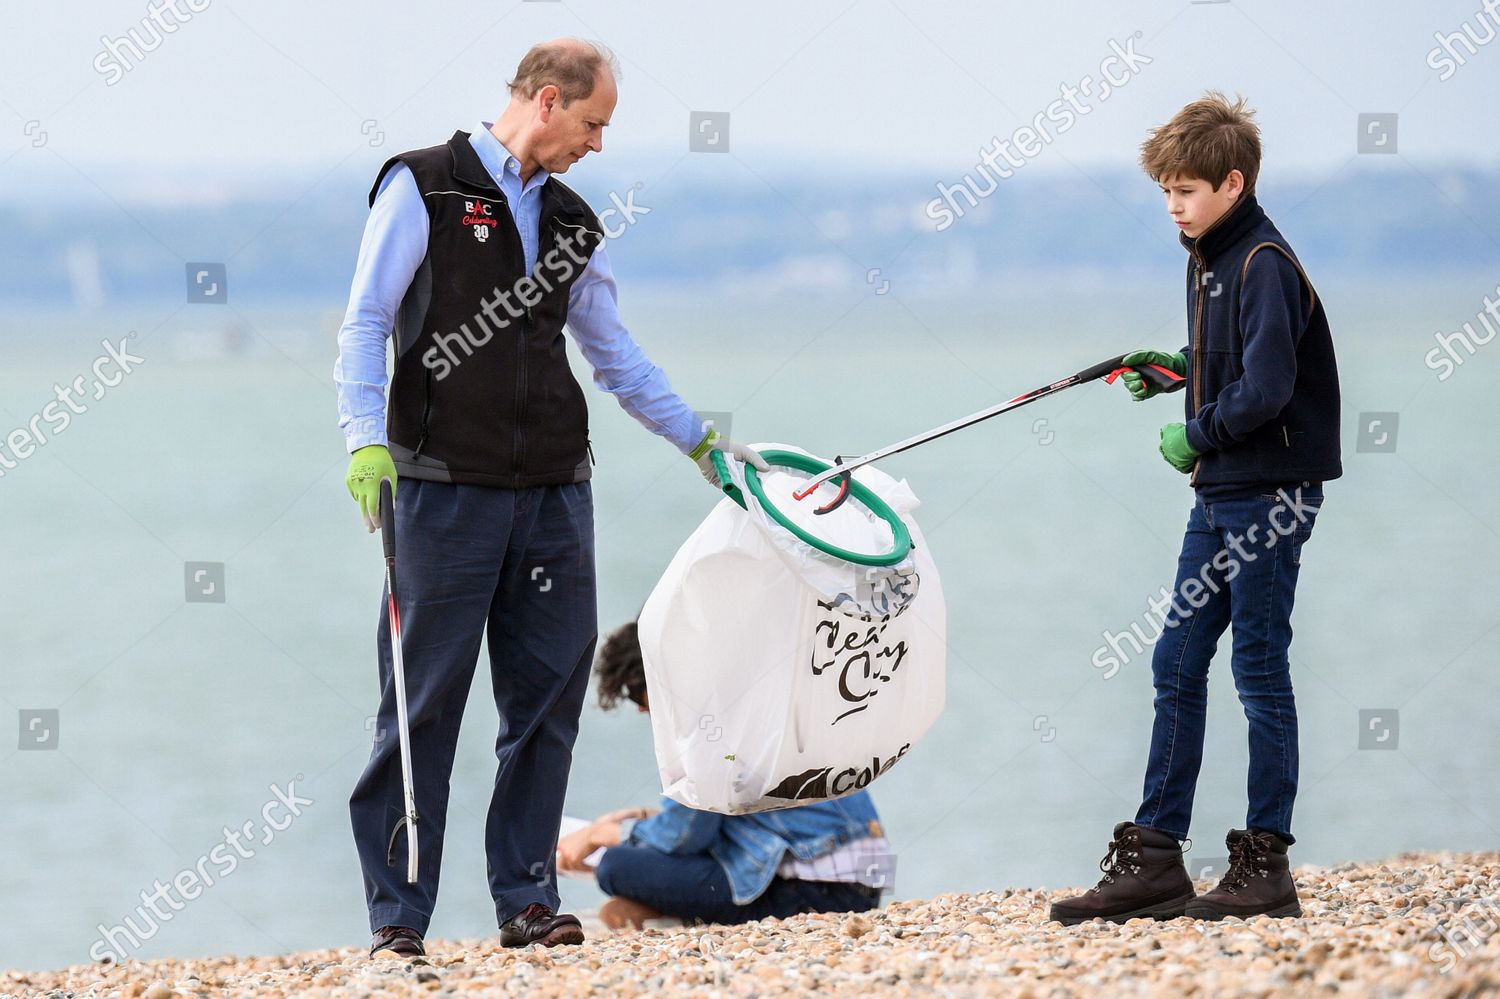 prince-edward-and-sophie-countess-of-wessex-great-british-beach-clean-southsea-beach-portsmouth-uk-shutterstock-editorial-10782998v.jpg